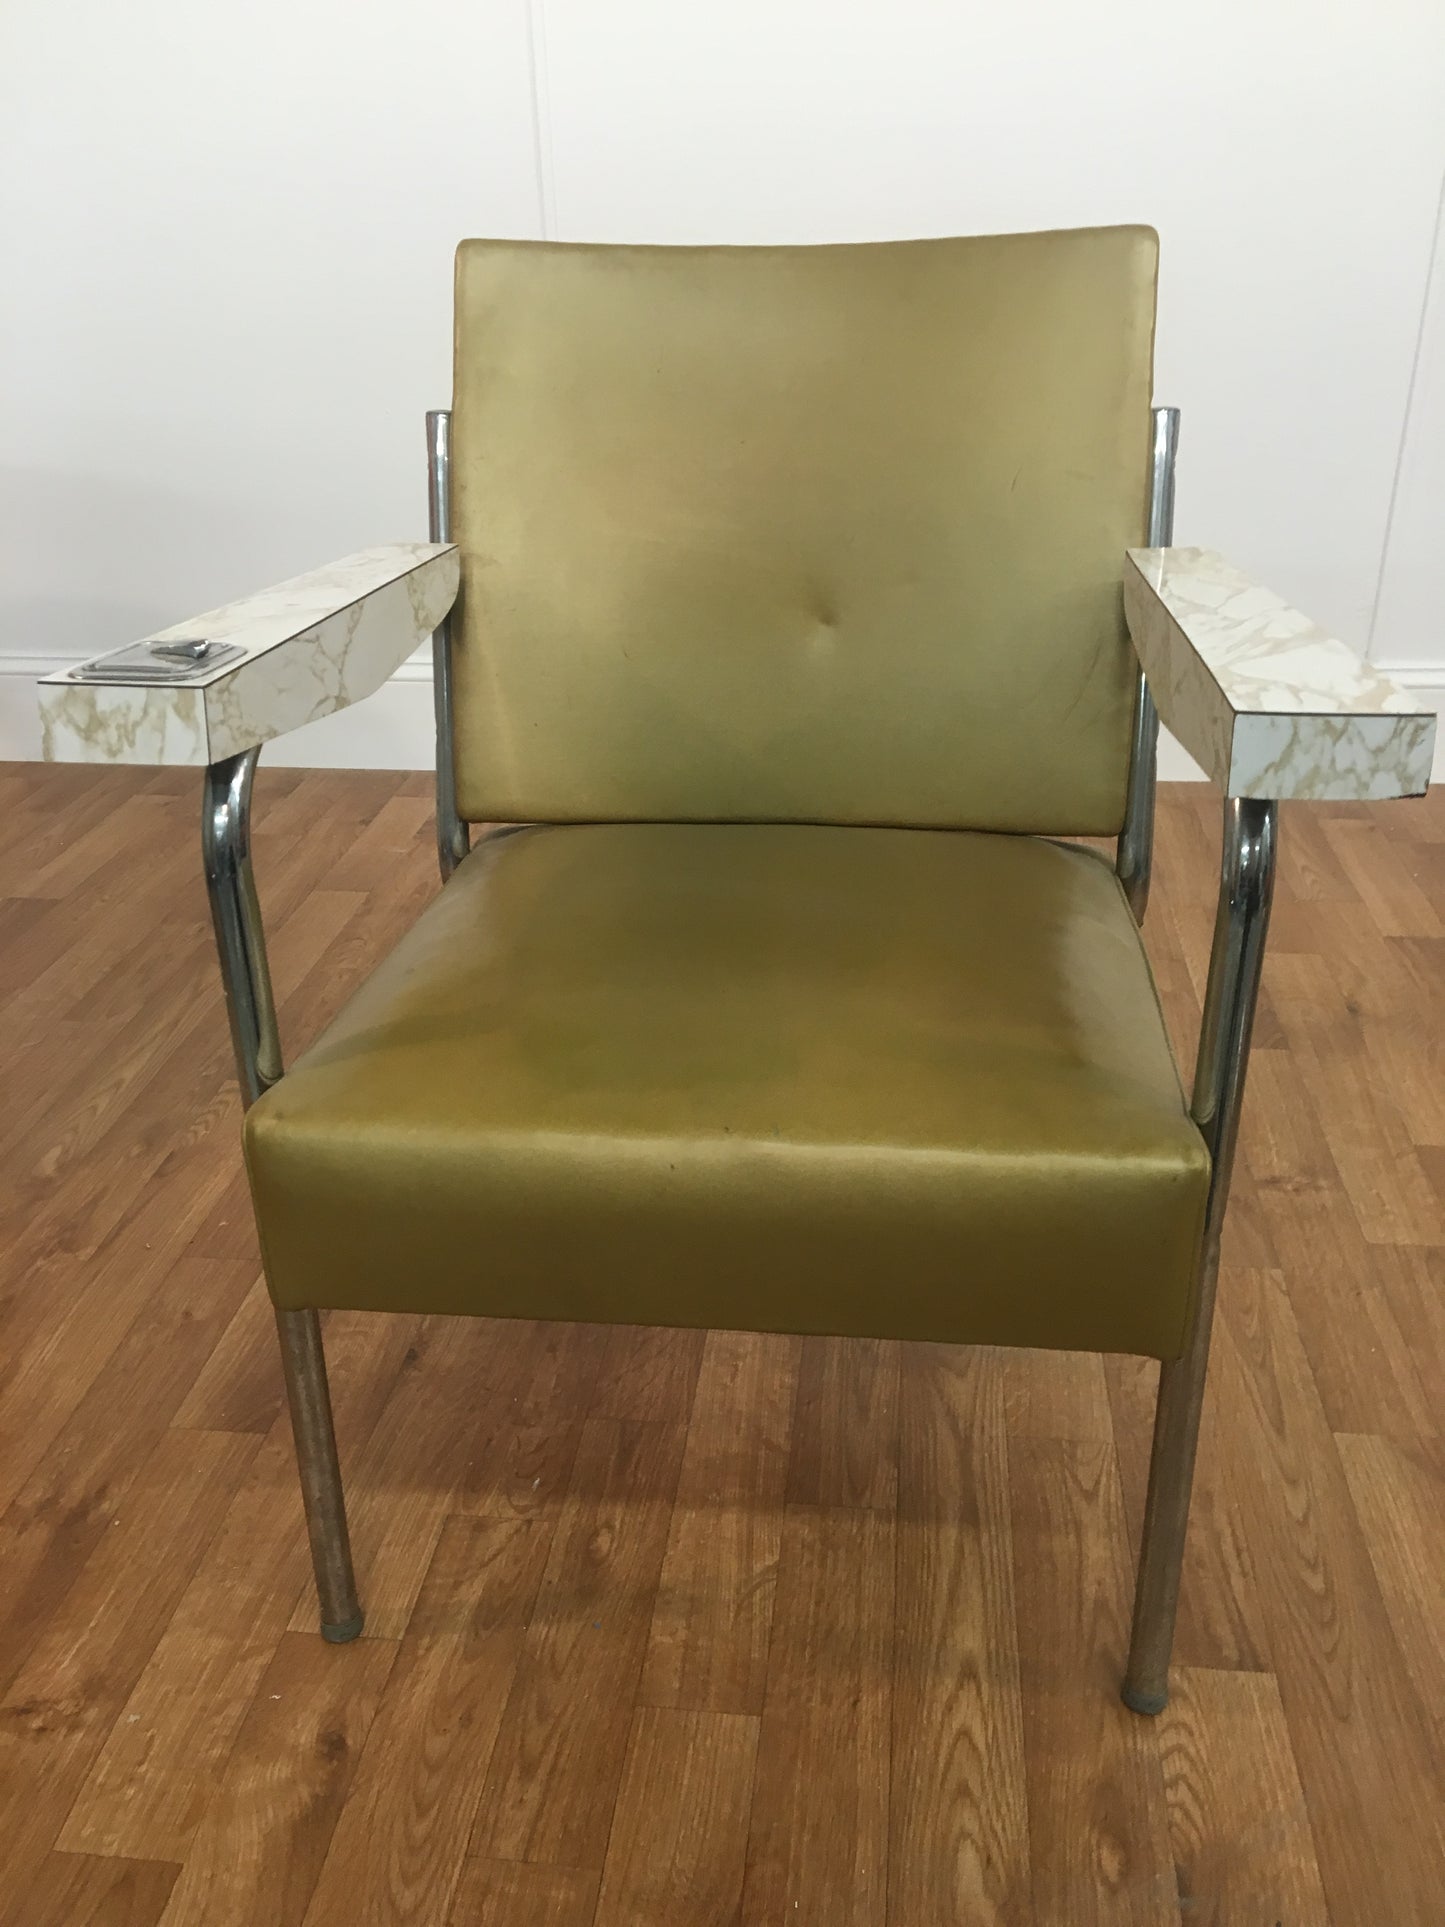 VINTAGE 1970s GOLD SALON CHAIR WITH ASH TRAY